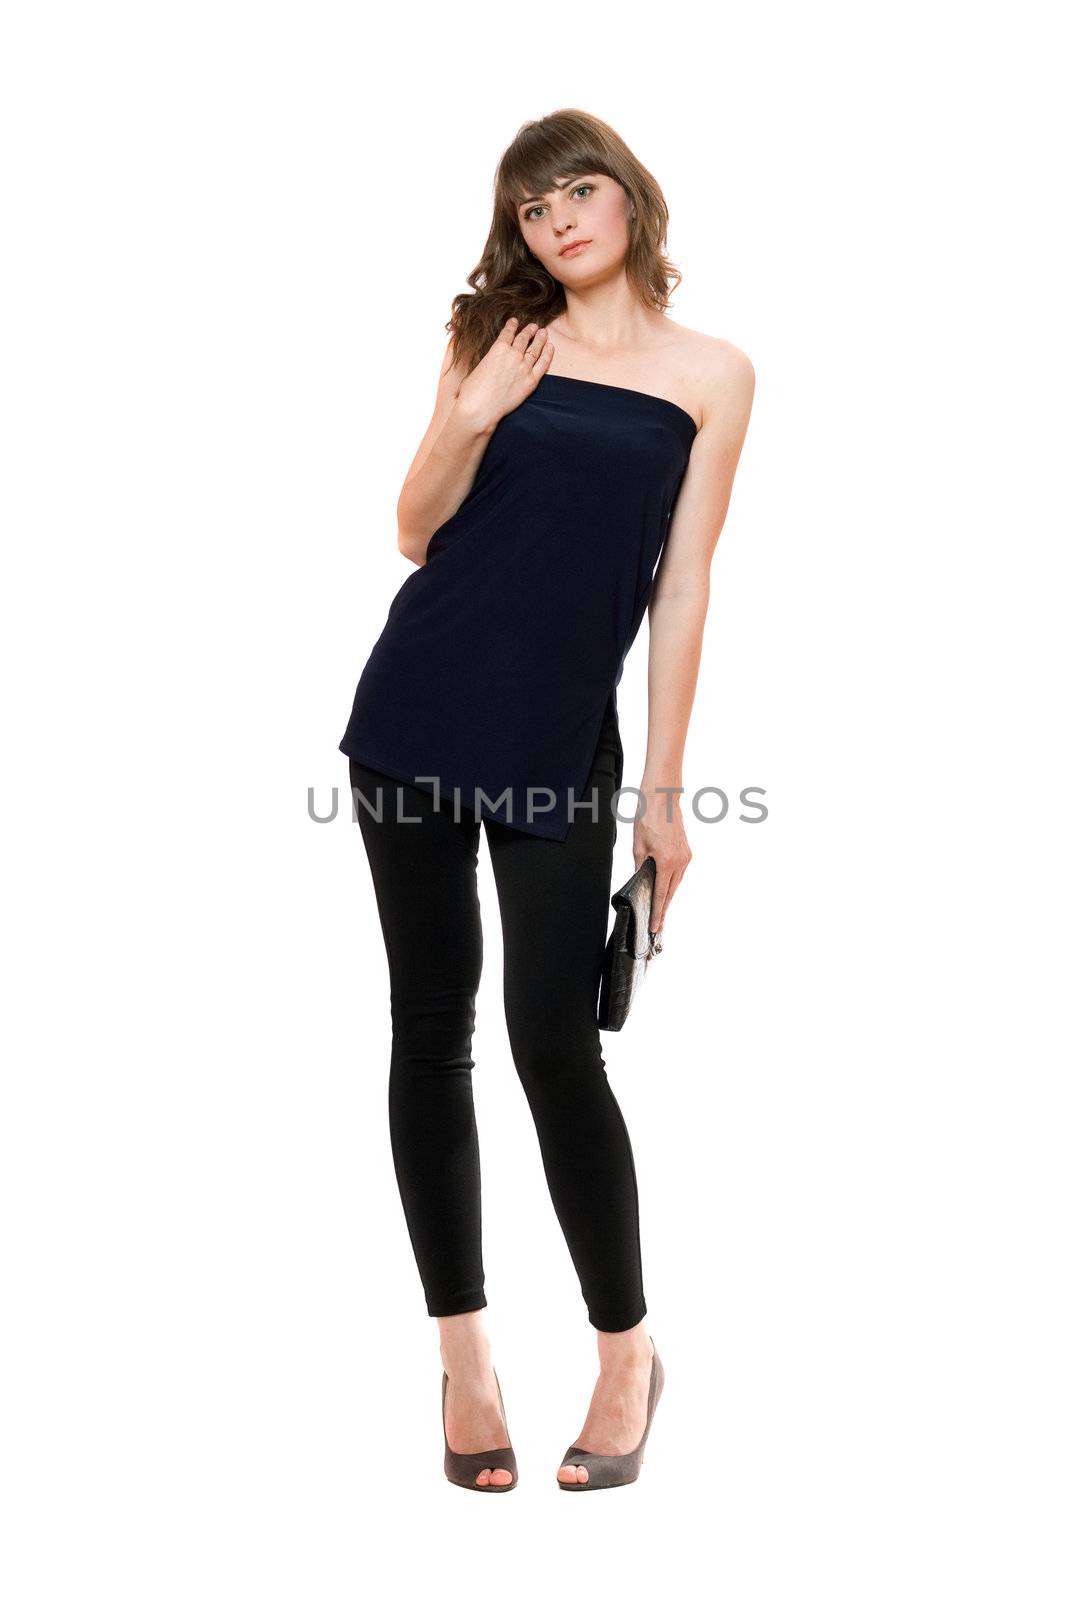 Beautiful girl in a black leggings. Isolated on white